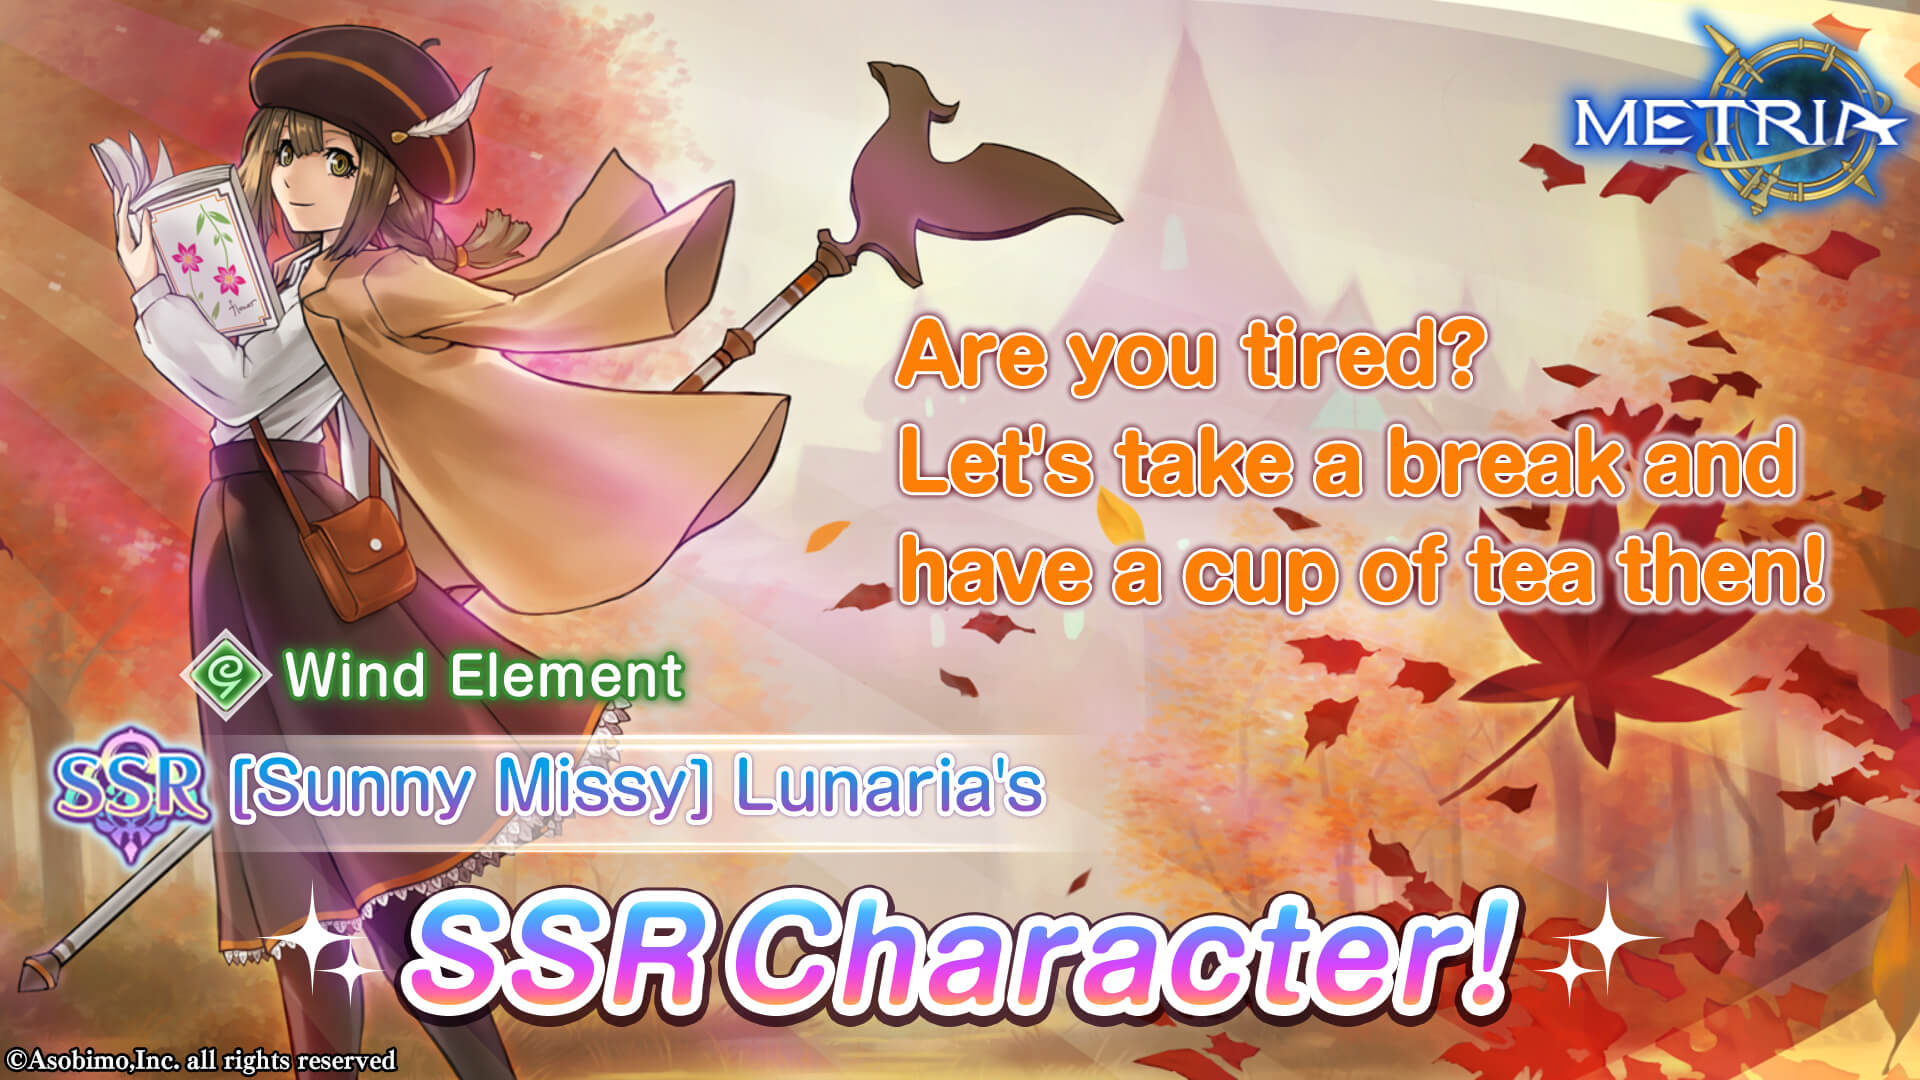 Wind Element! SSR Character: "Sunny Missy Lunaria's" Available for Purchase!